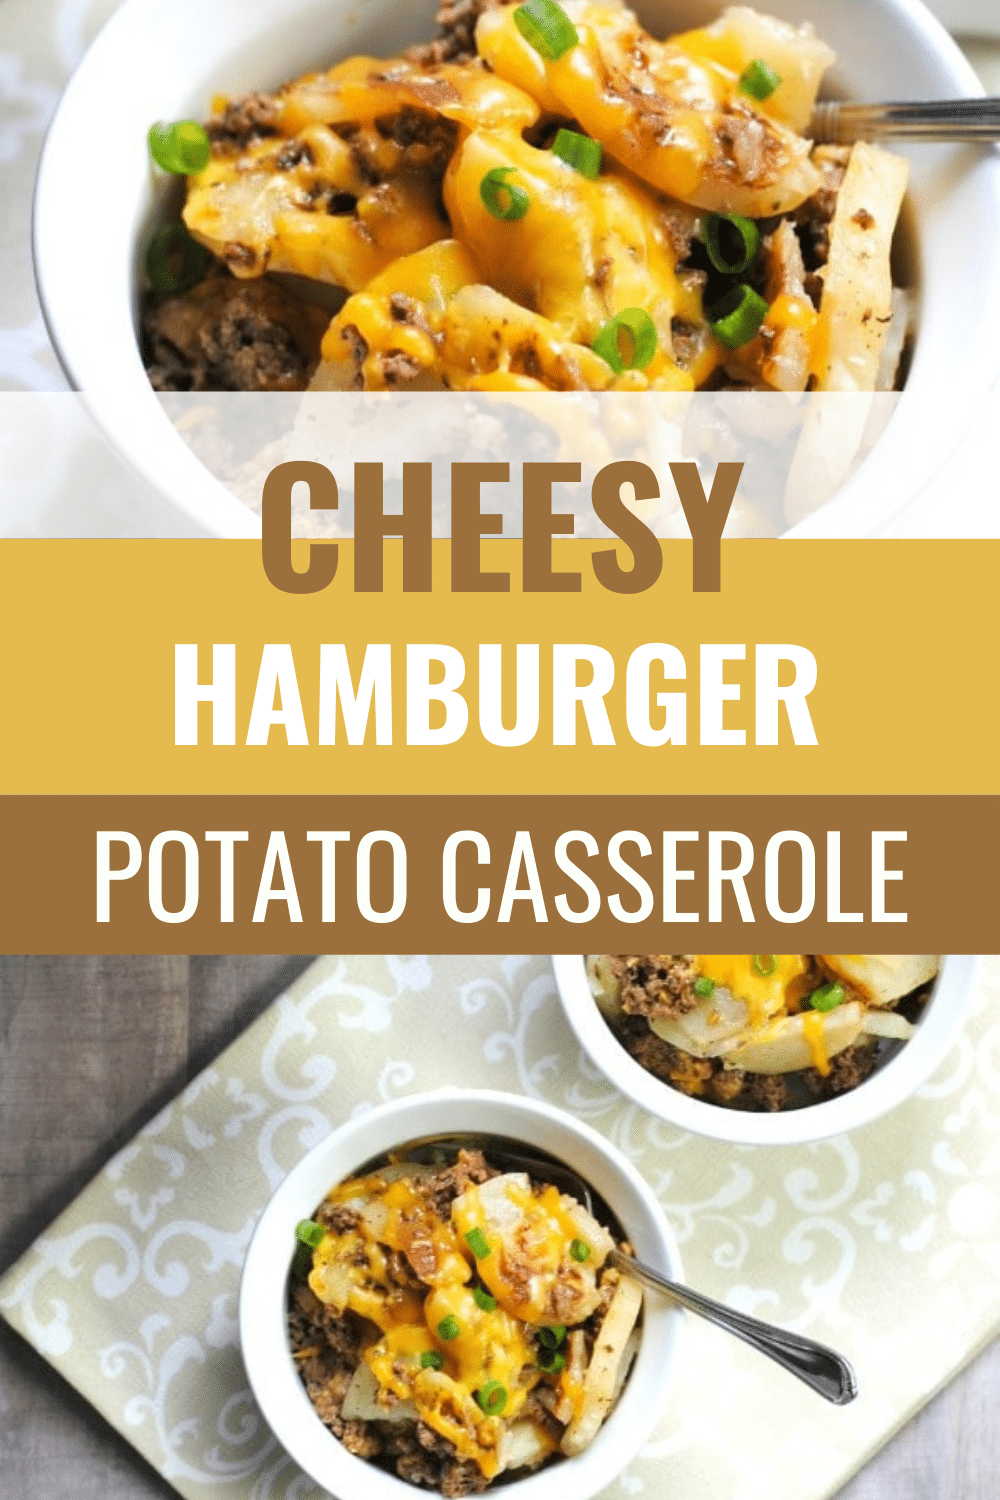 This Instant Pot Cheesy Hamburger Potato Casserole is a family favorite! Super easy, kids love it, and very hearty. #instantpot #easydinner #casserole via @wondermomwannab